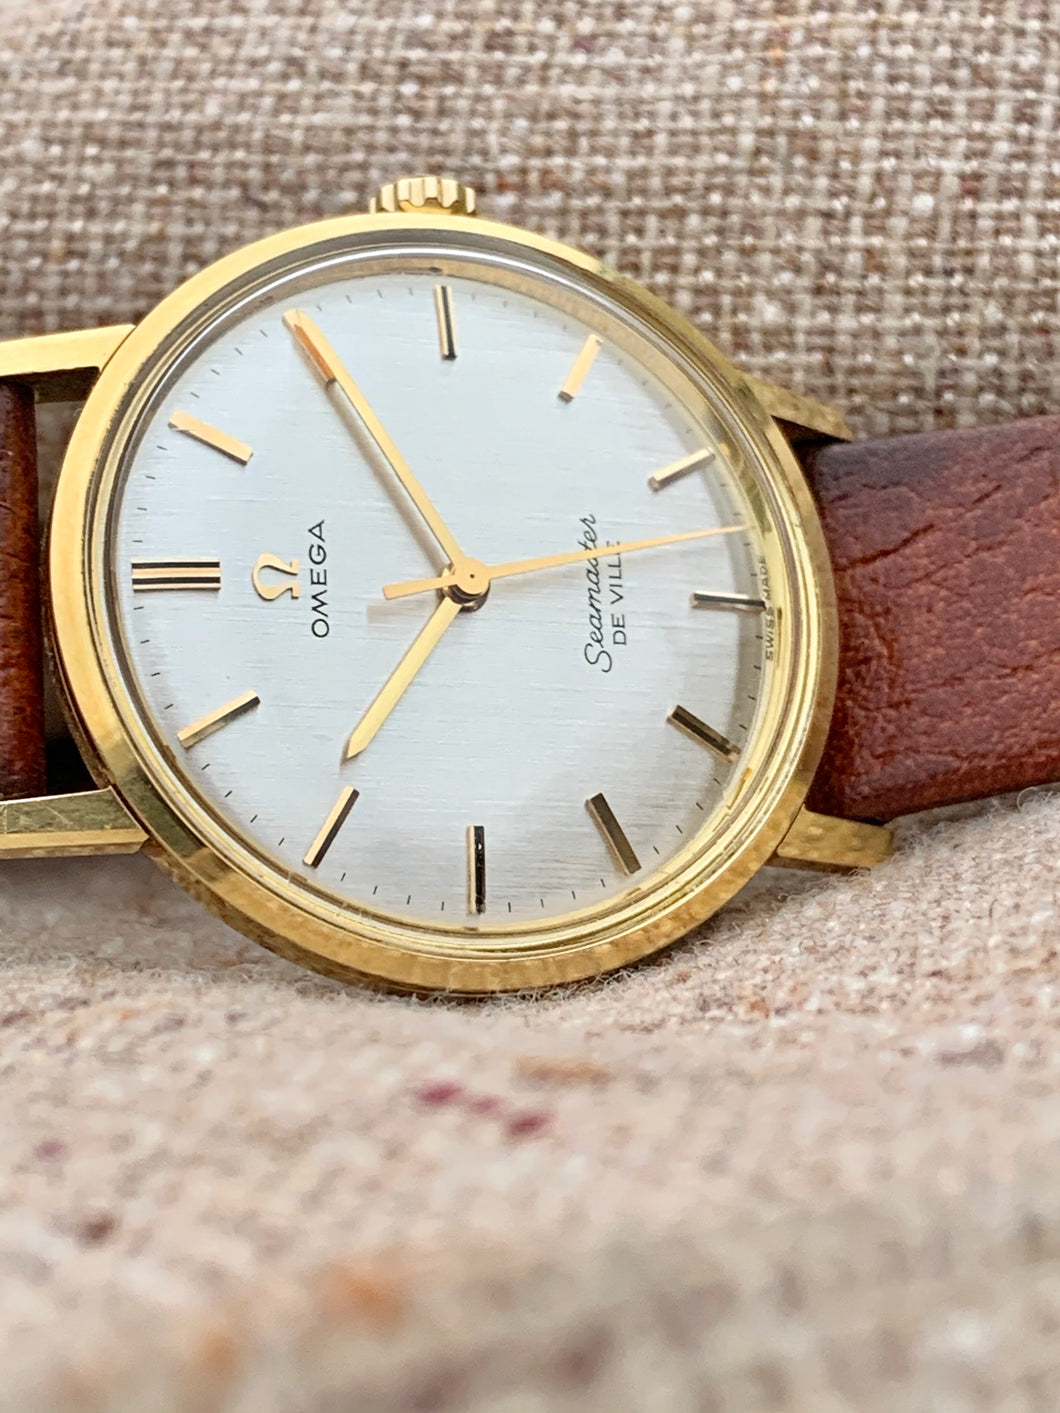 1964 Omega Seamaster De Ville in solid 18ct gold and silky dial